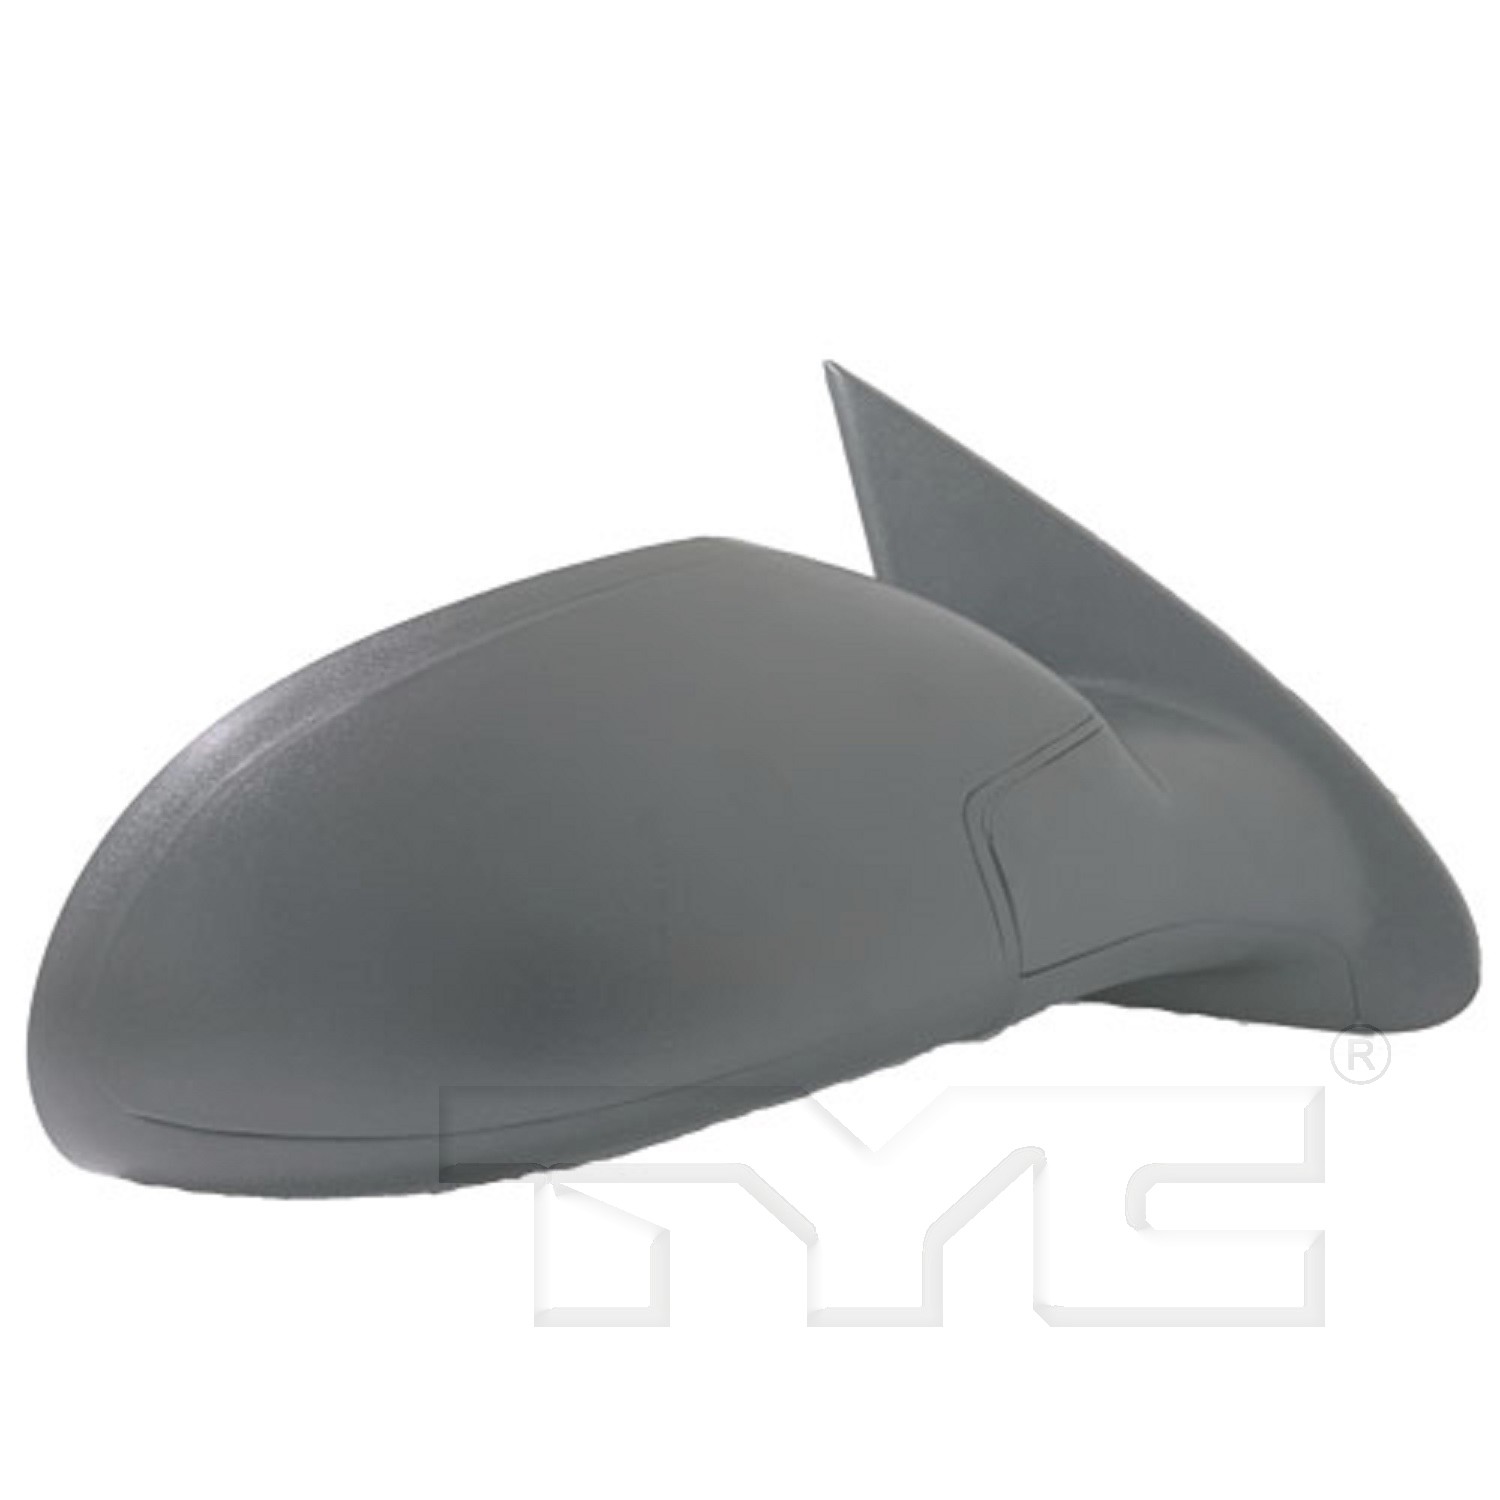 Aftermarket MIRRORS for PONTIAC - G5, G5,07-10,RT Mirror outside rear view